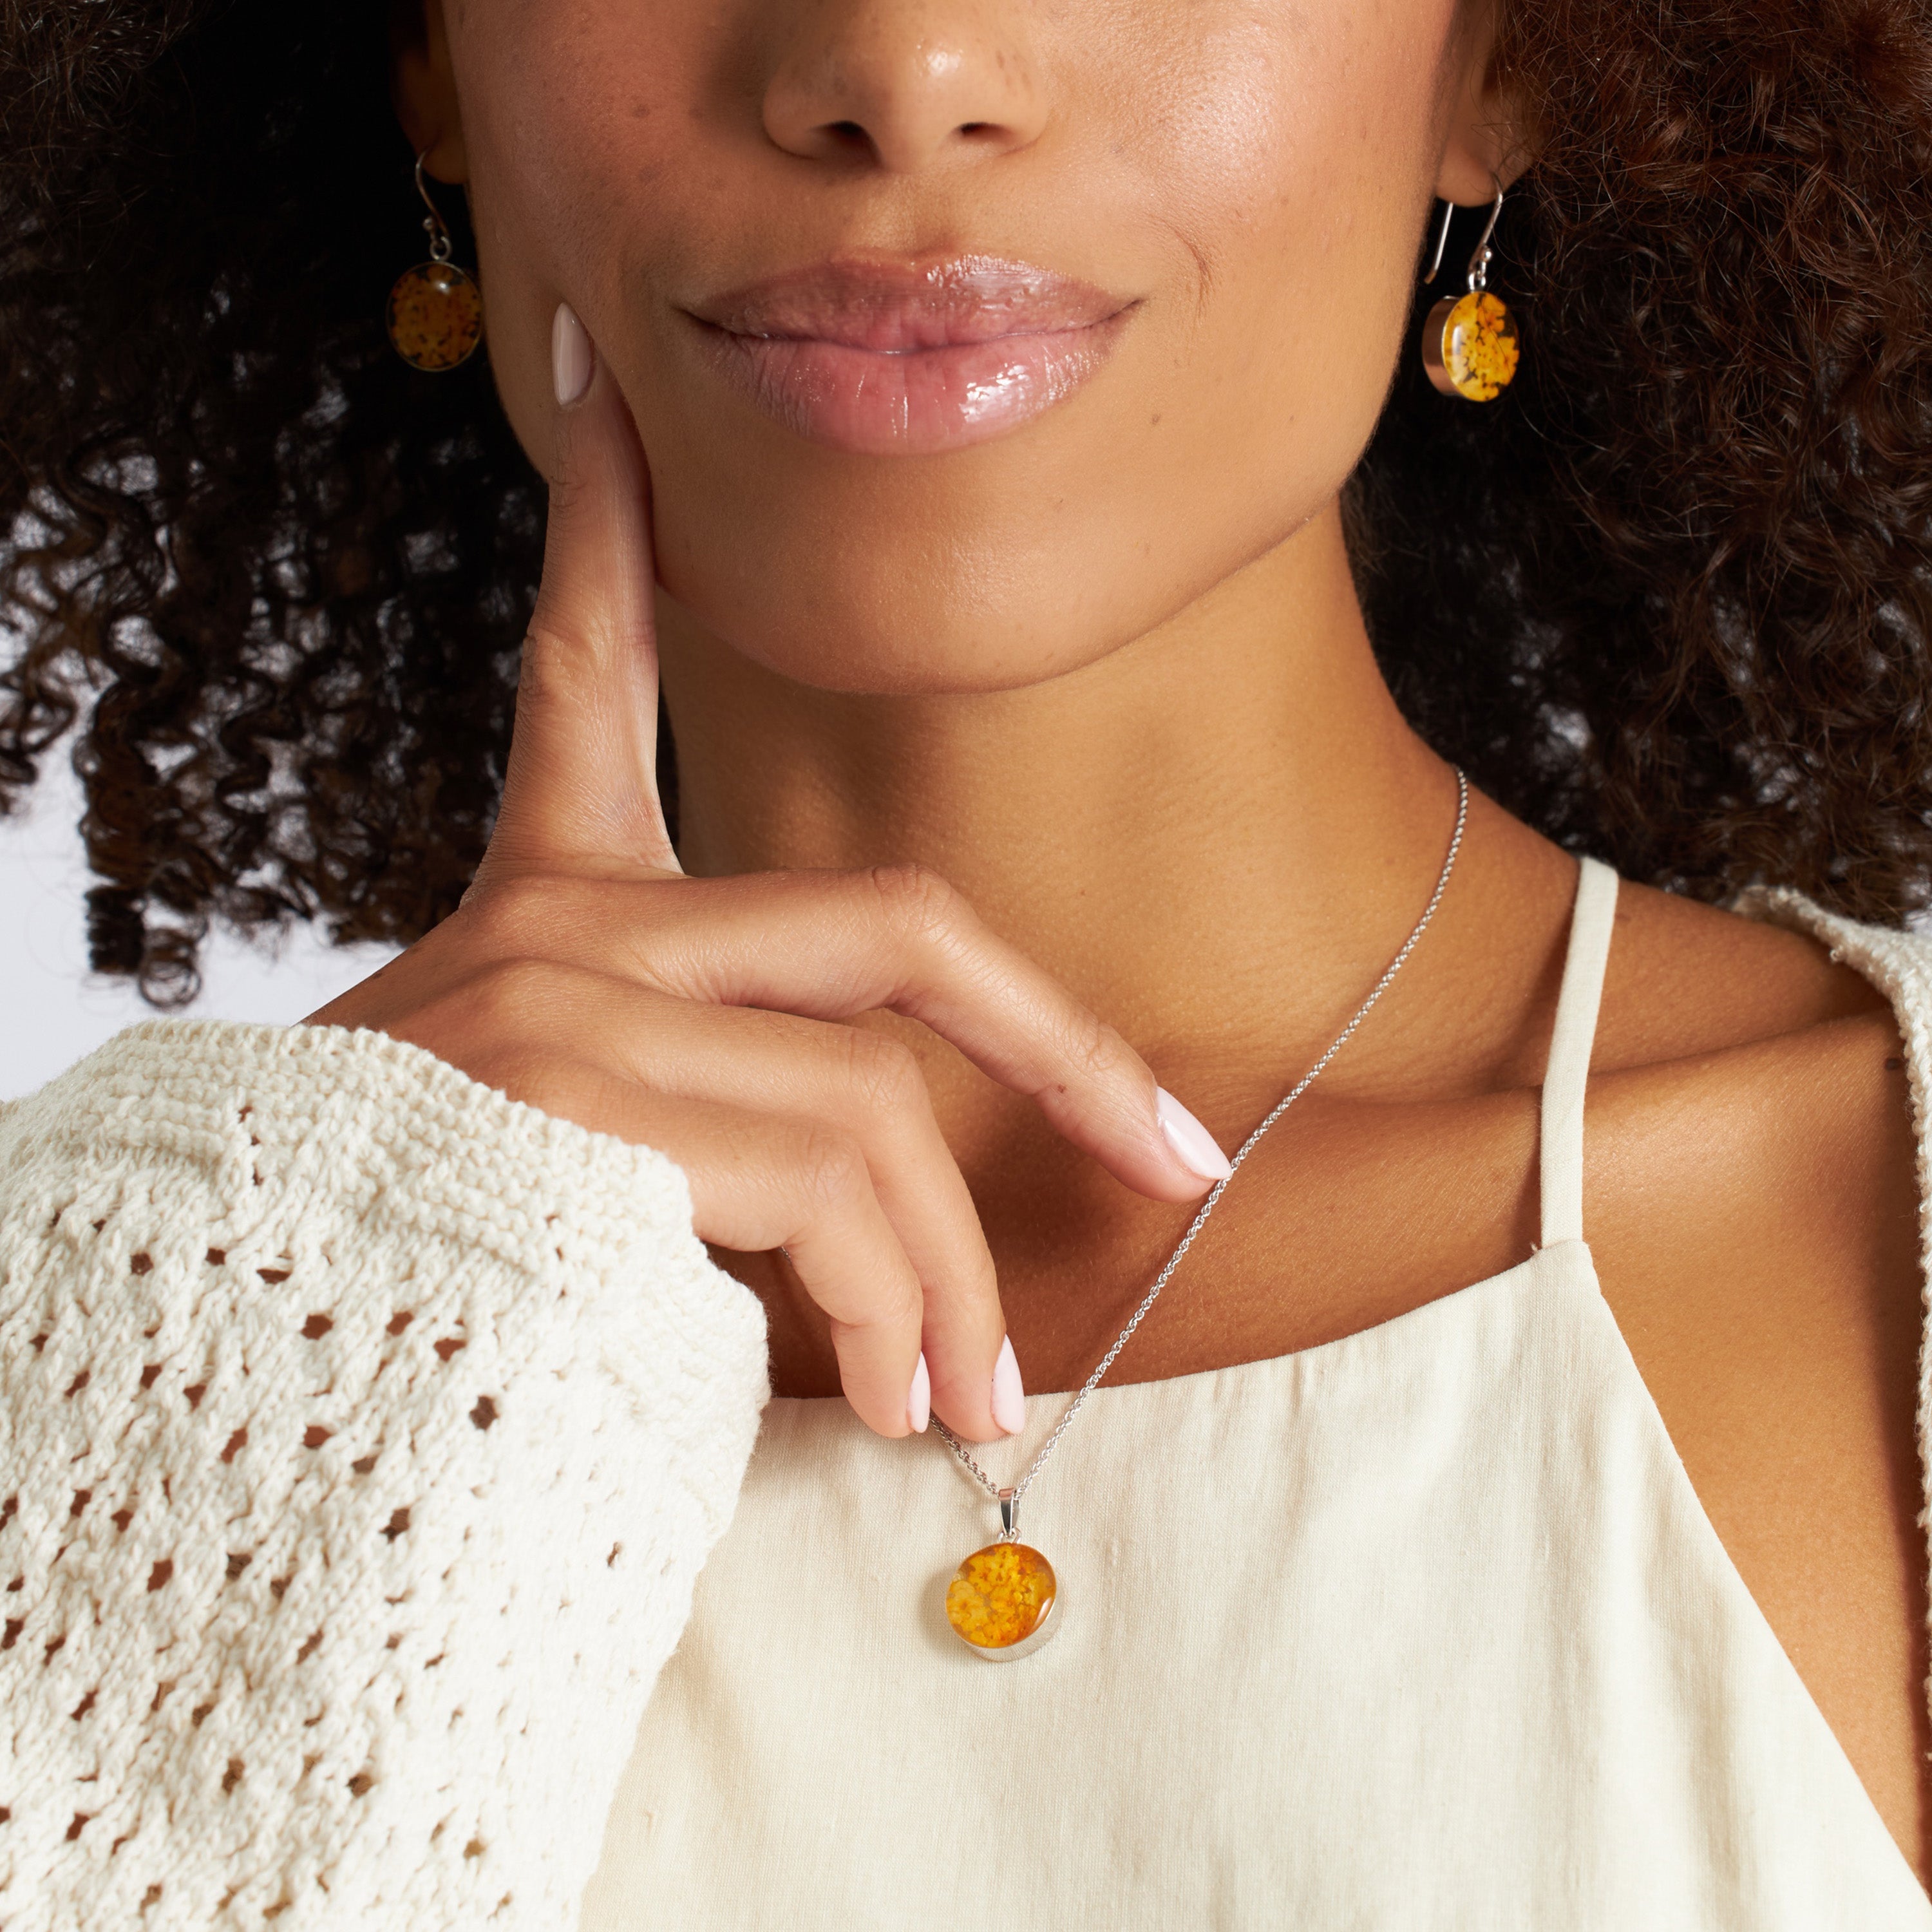 Halo Drop Earrings with Yellow Flowers